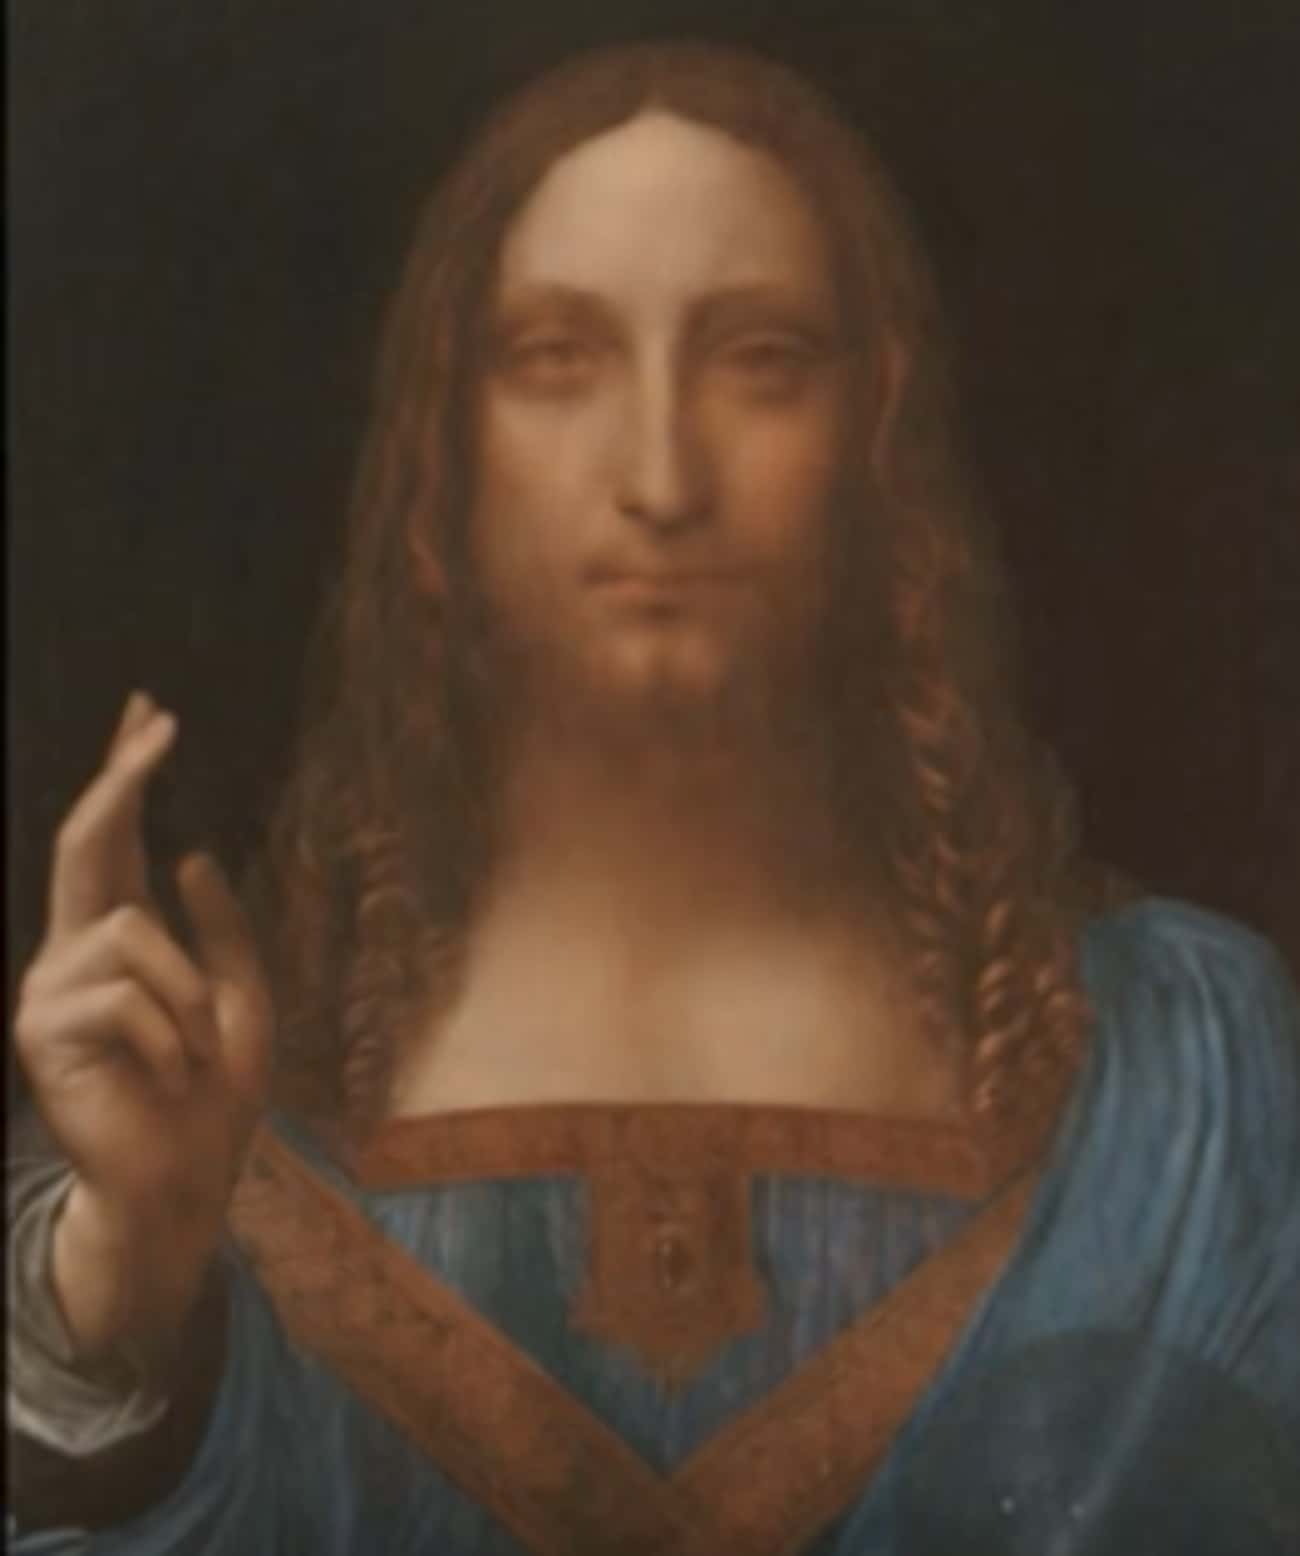 We Have No Idea What Jesus Actually Looked Like